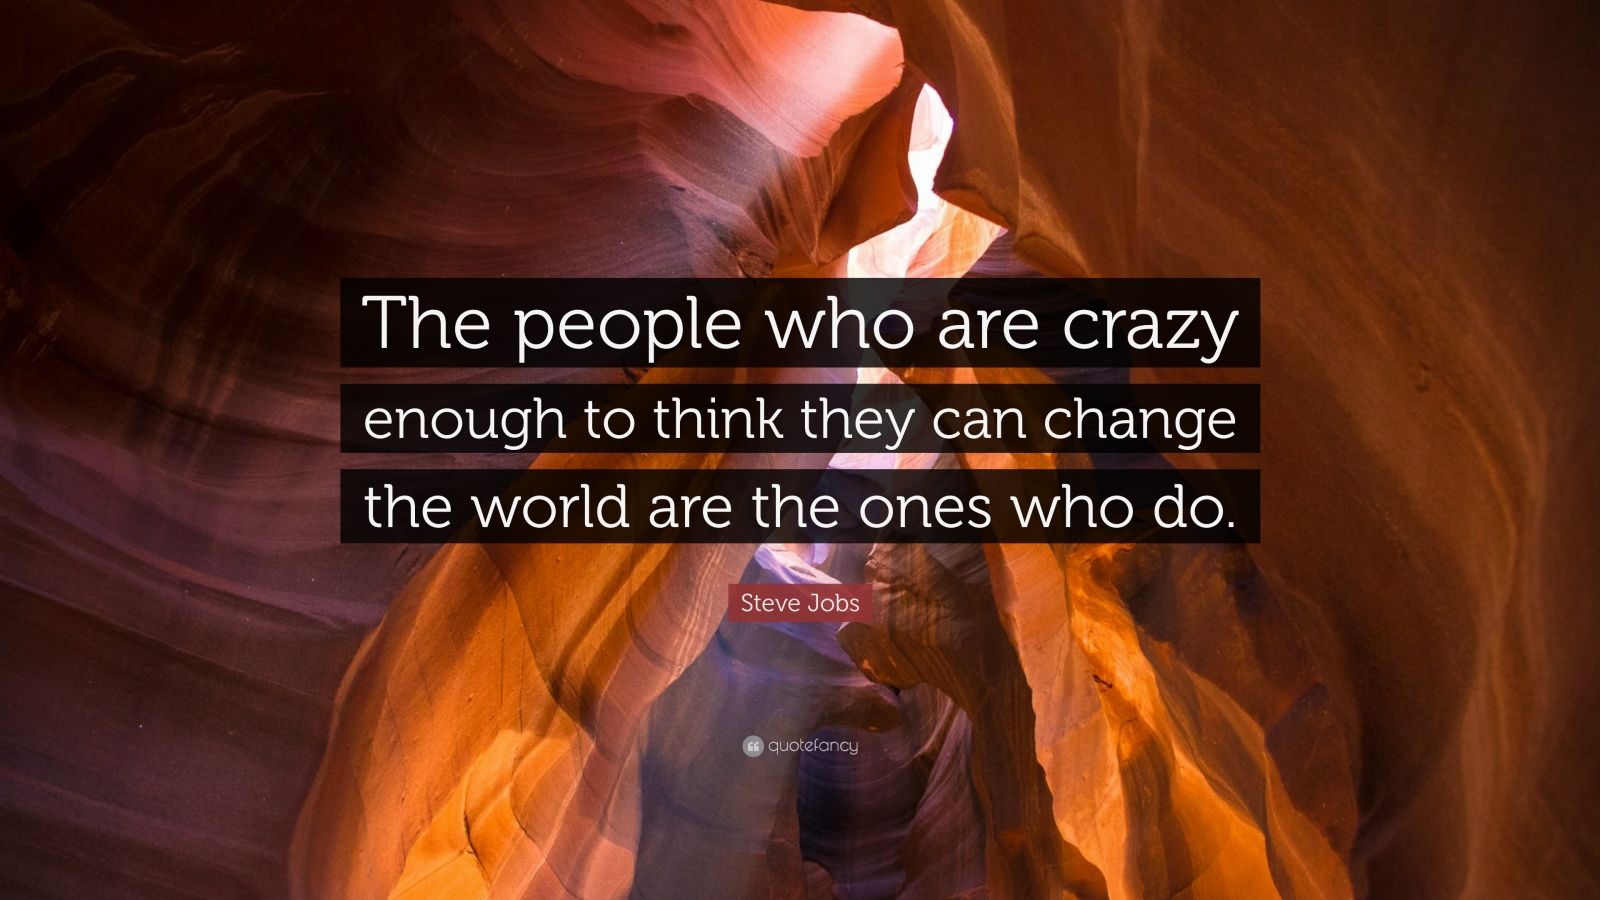 Steve Jobs Quote: “The people who are crazy enough to think they can